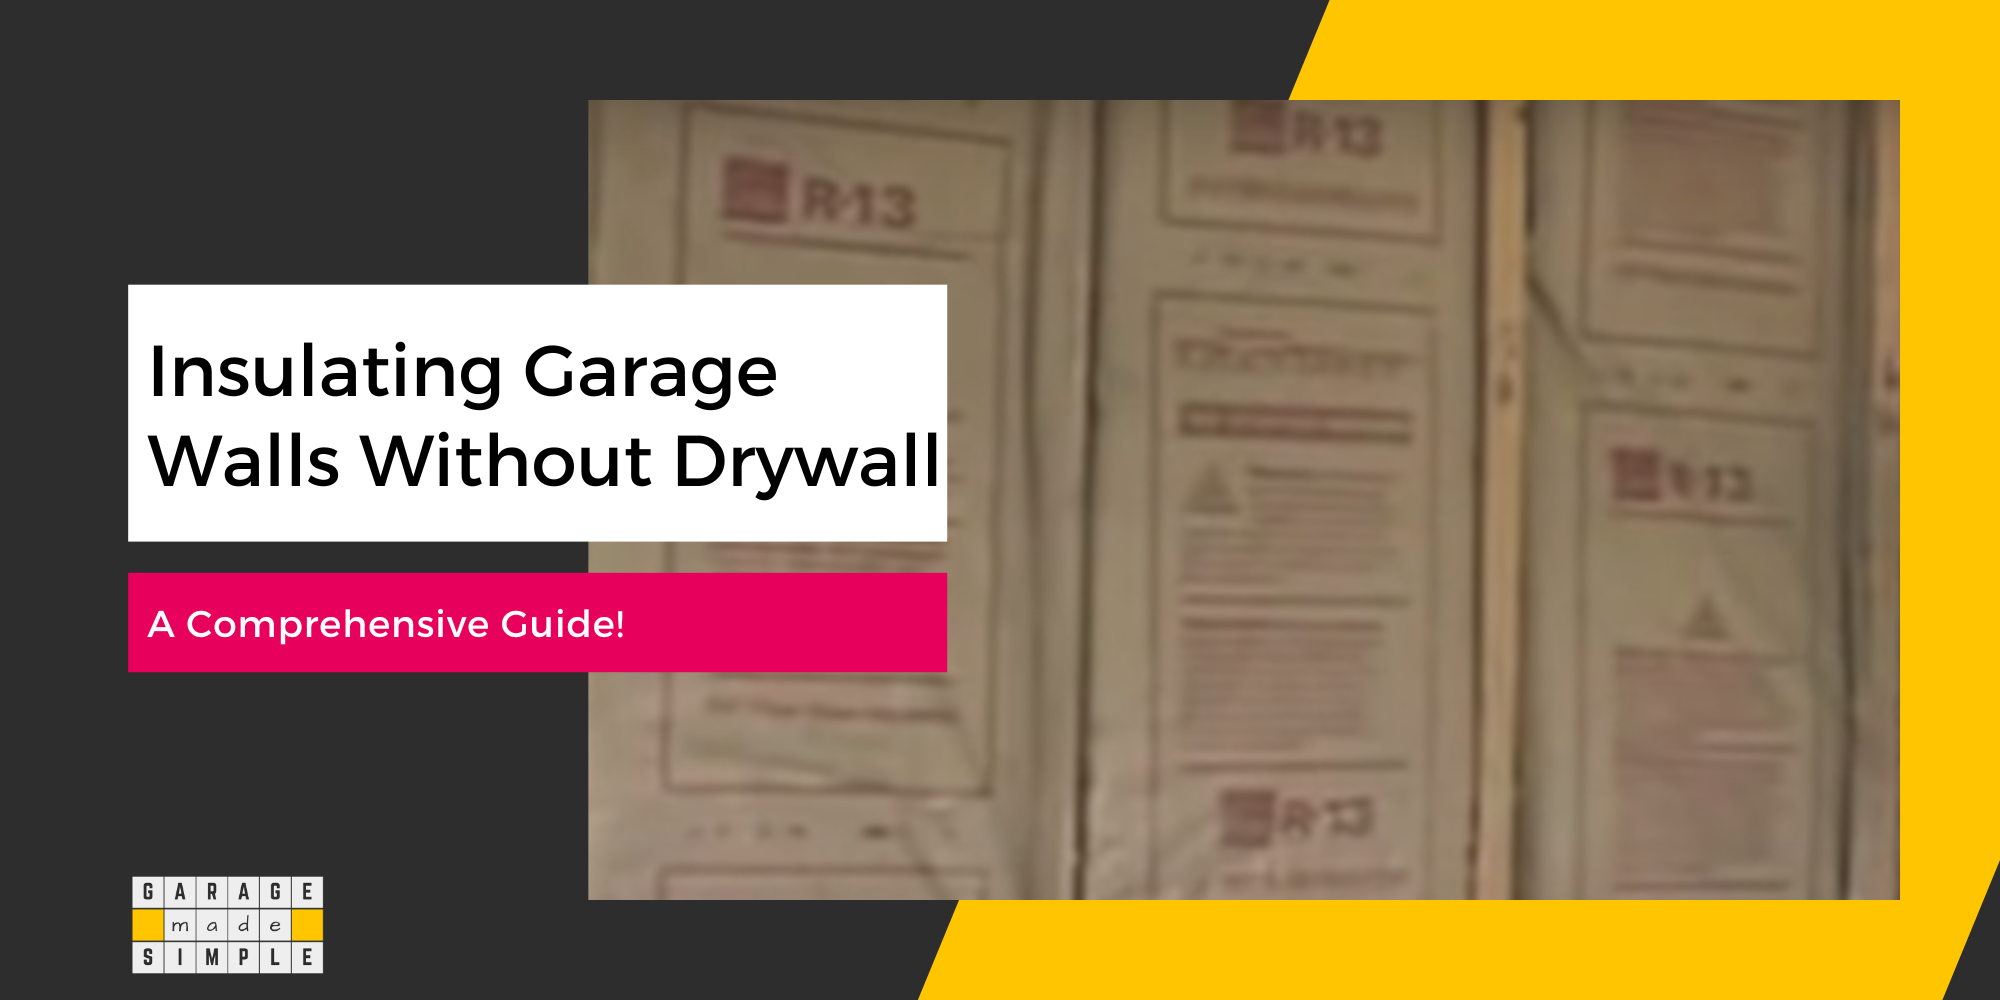 Insulating Garage Walls Without Drywall: A Comprehensive Guide